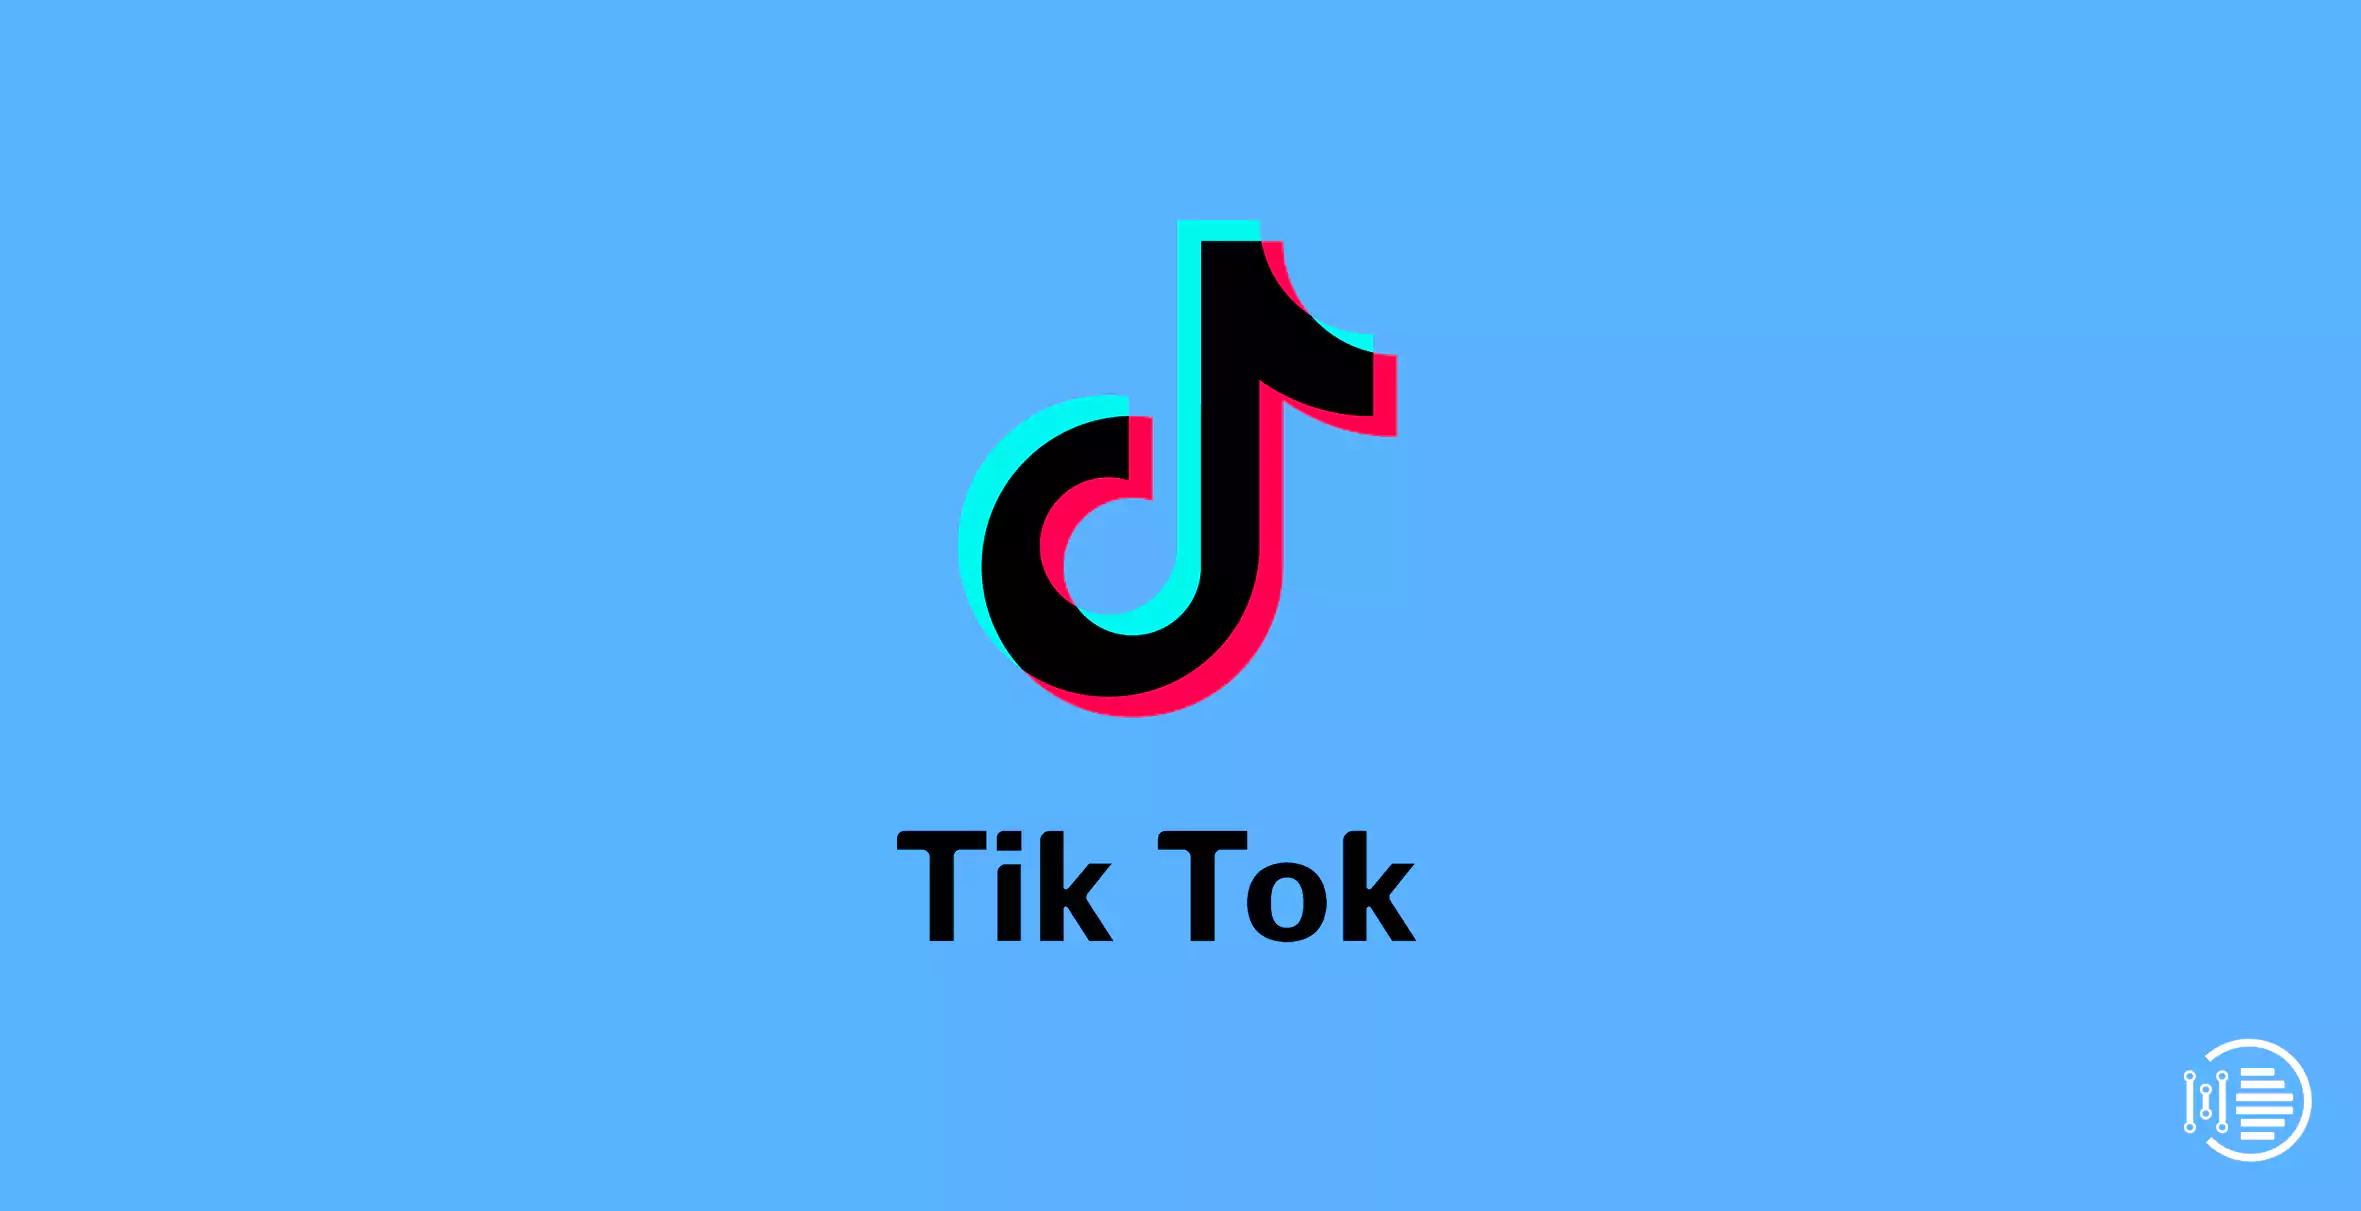 What Happens If You Like and Then Unlike a Video on TikTok